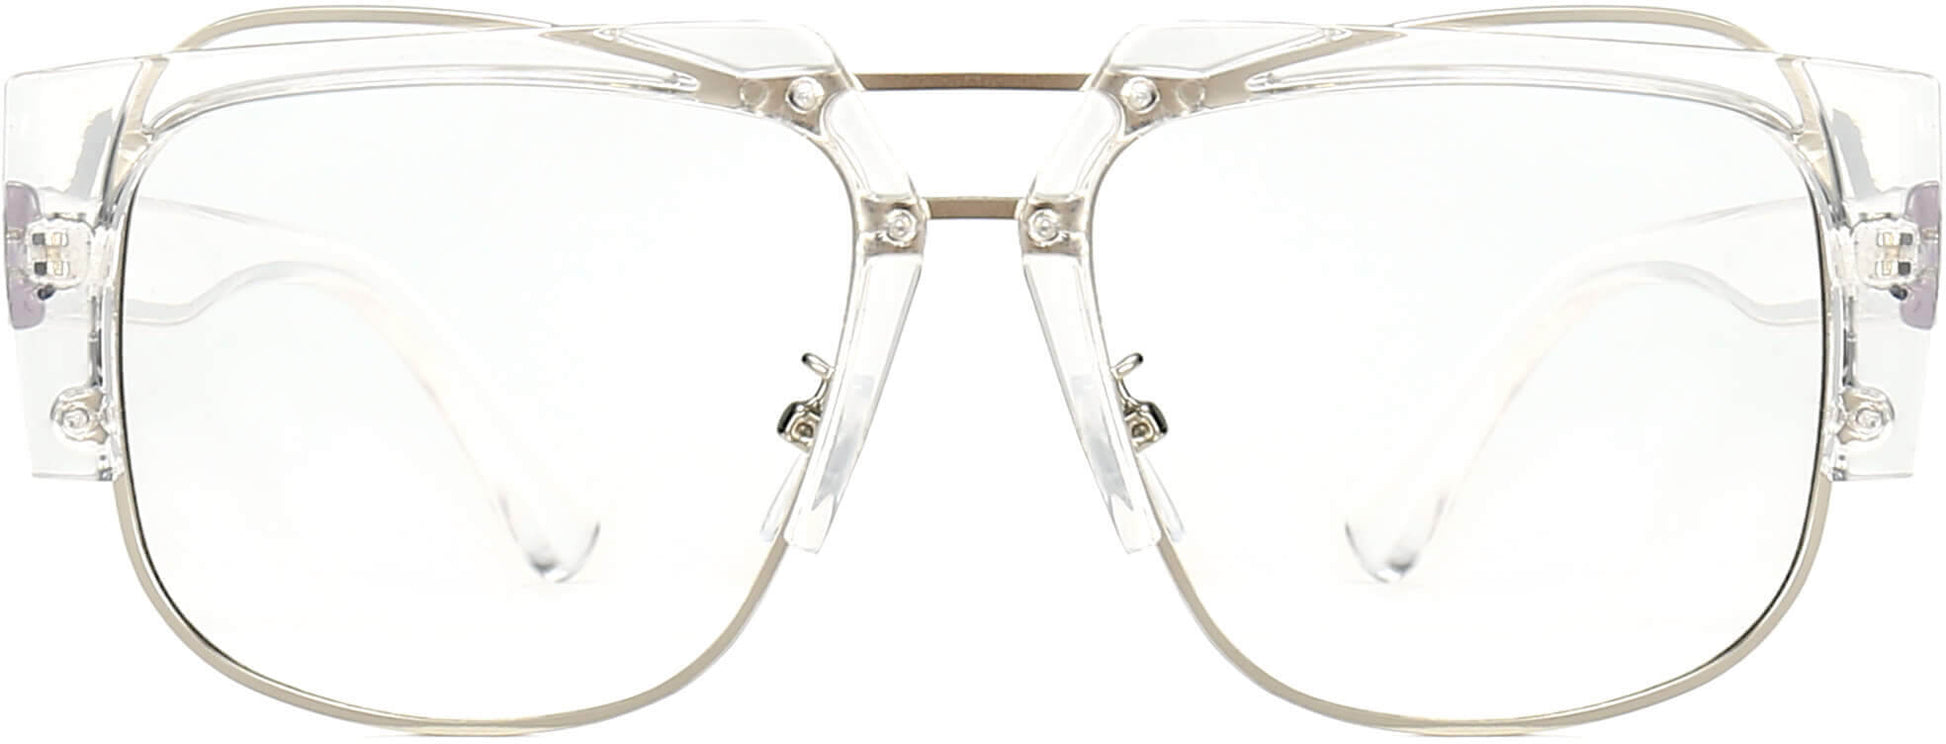 Oscar Square Clear Eyeglasses from ANRRI, front view